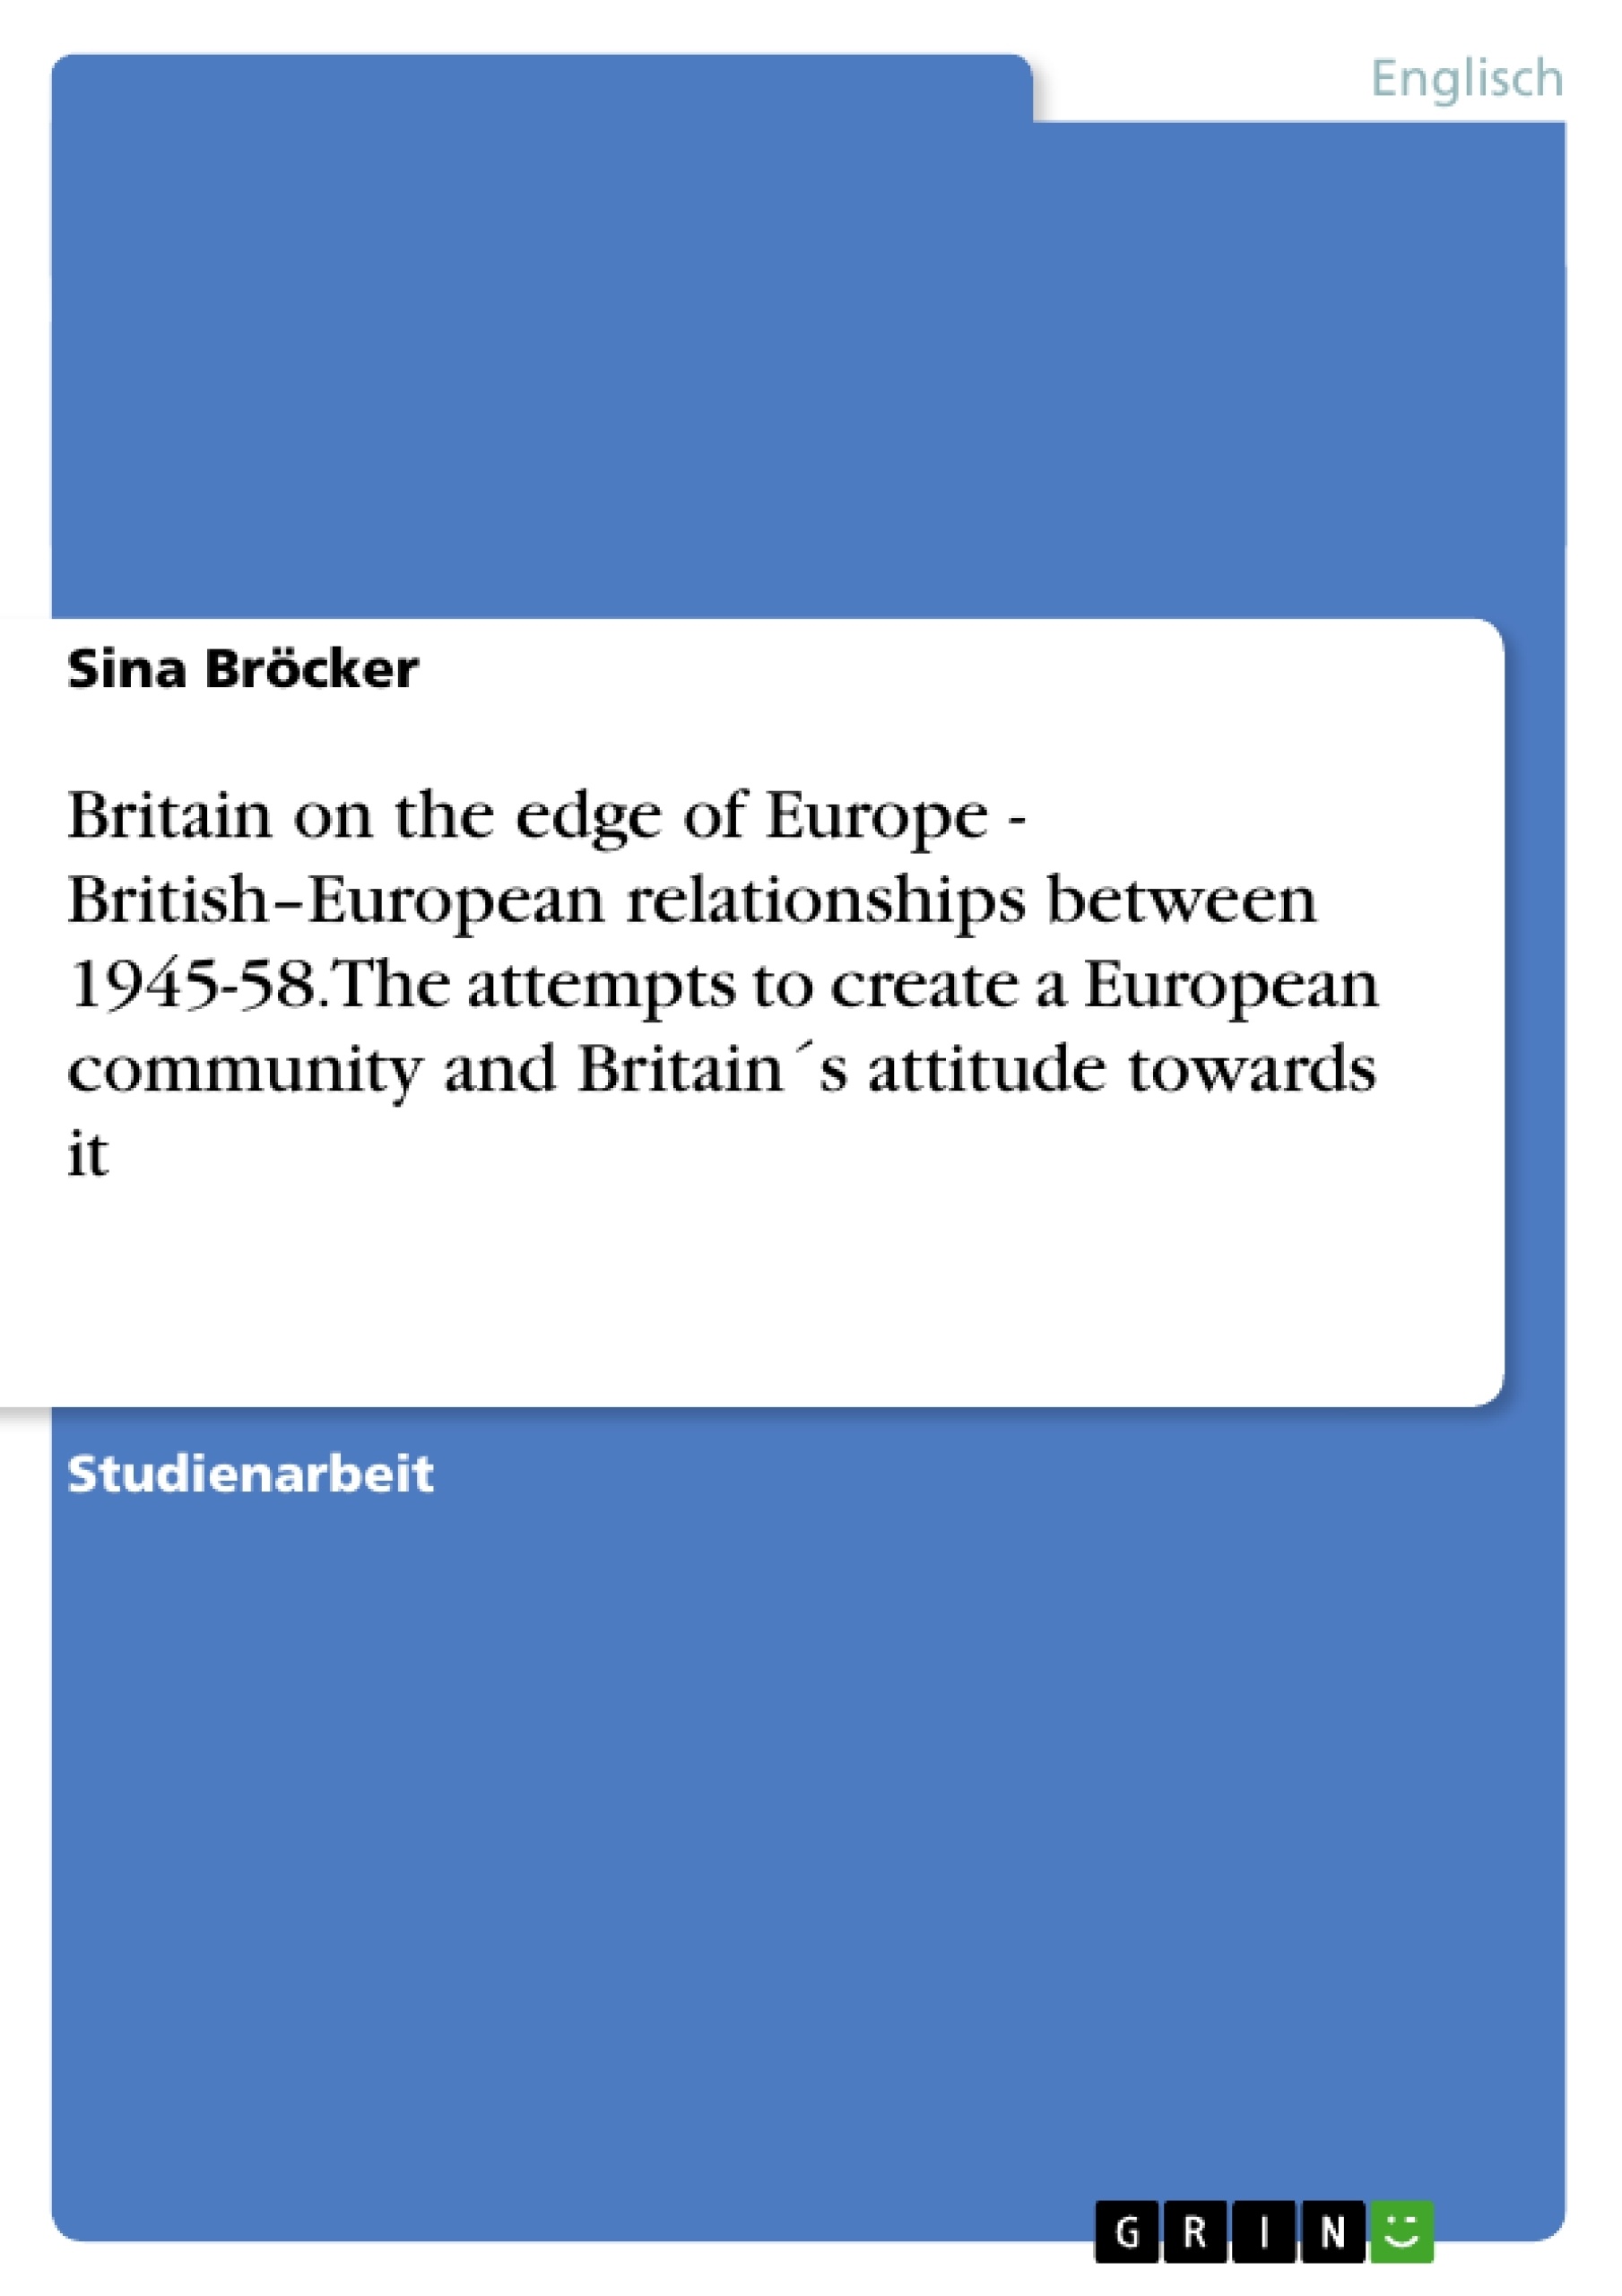 Titre: Britain on the edge of Europe - British–European relationships between 1945-58. The attempts to create a European community and Britain´s attitude towards it